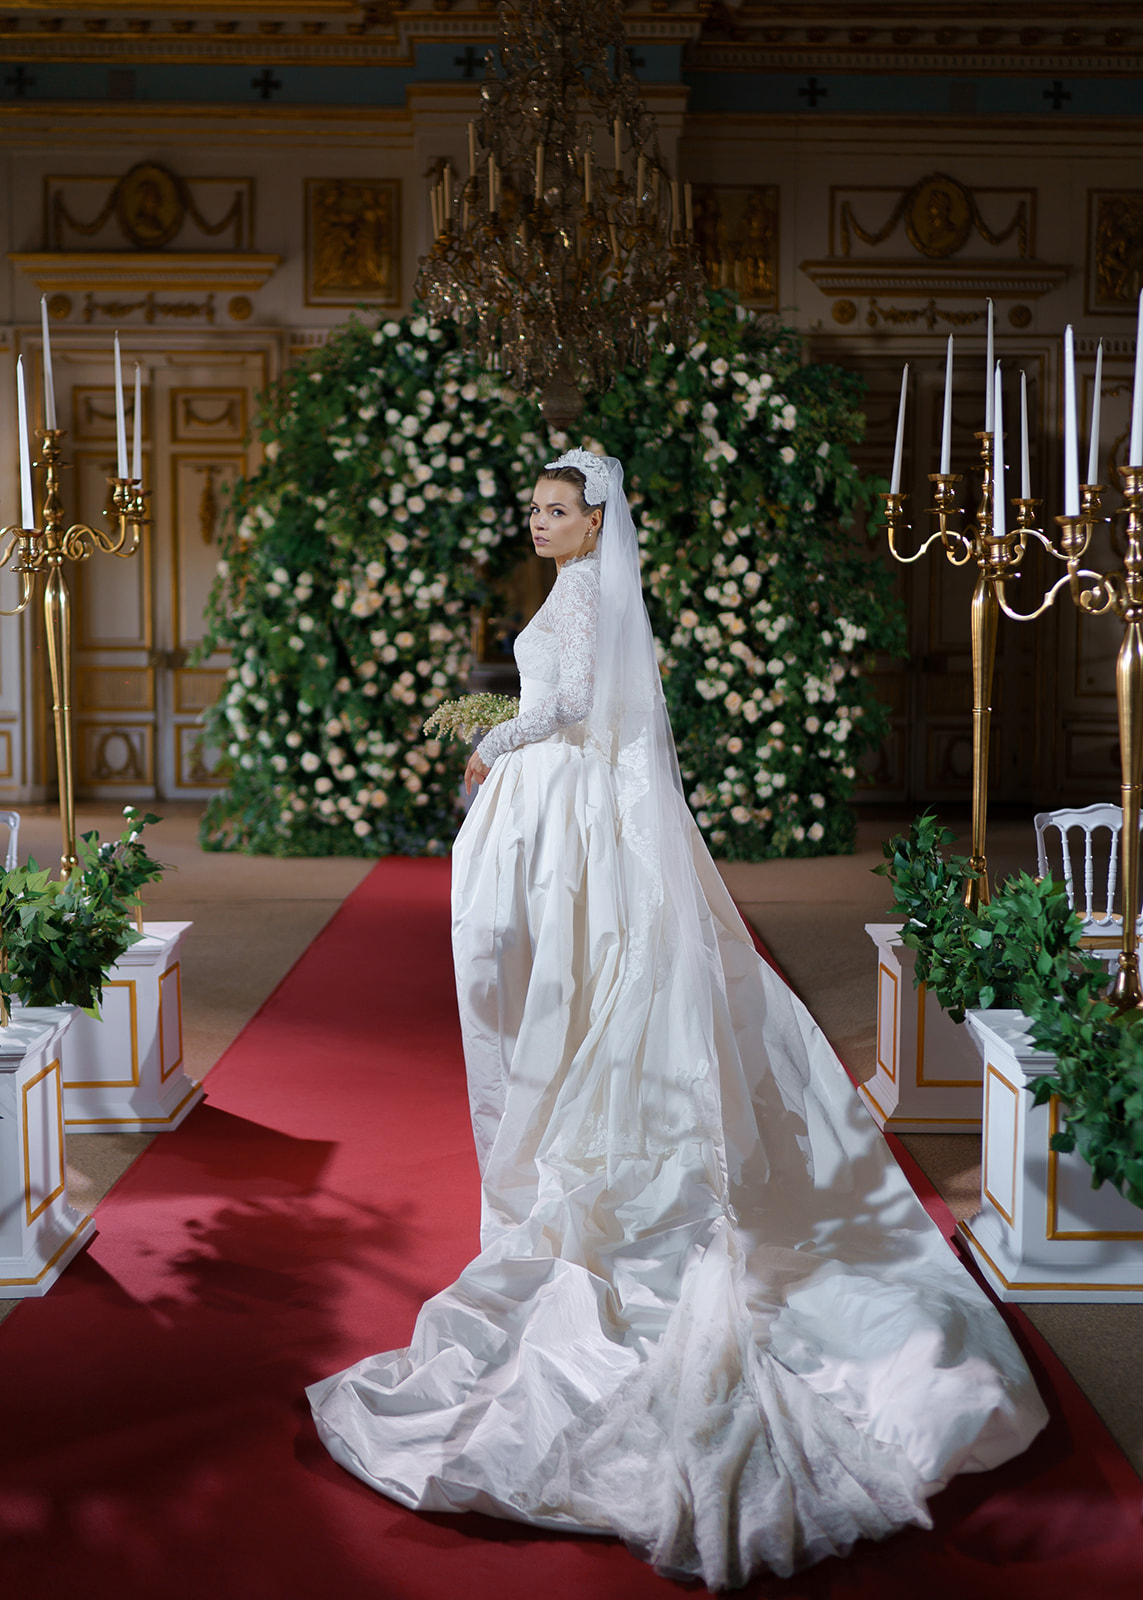 Grace Kelly inspired bride poses on red carpet aisle